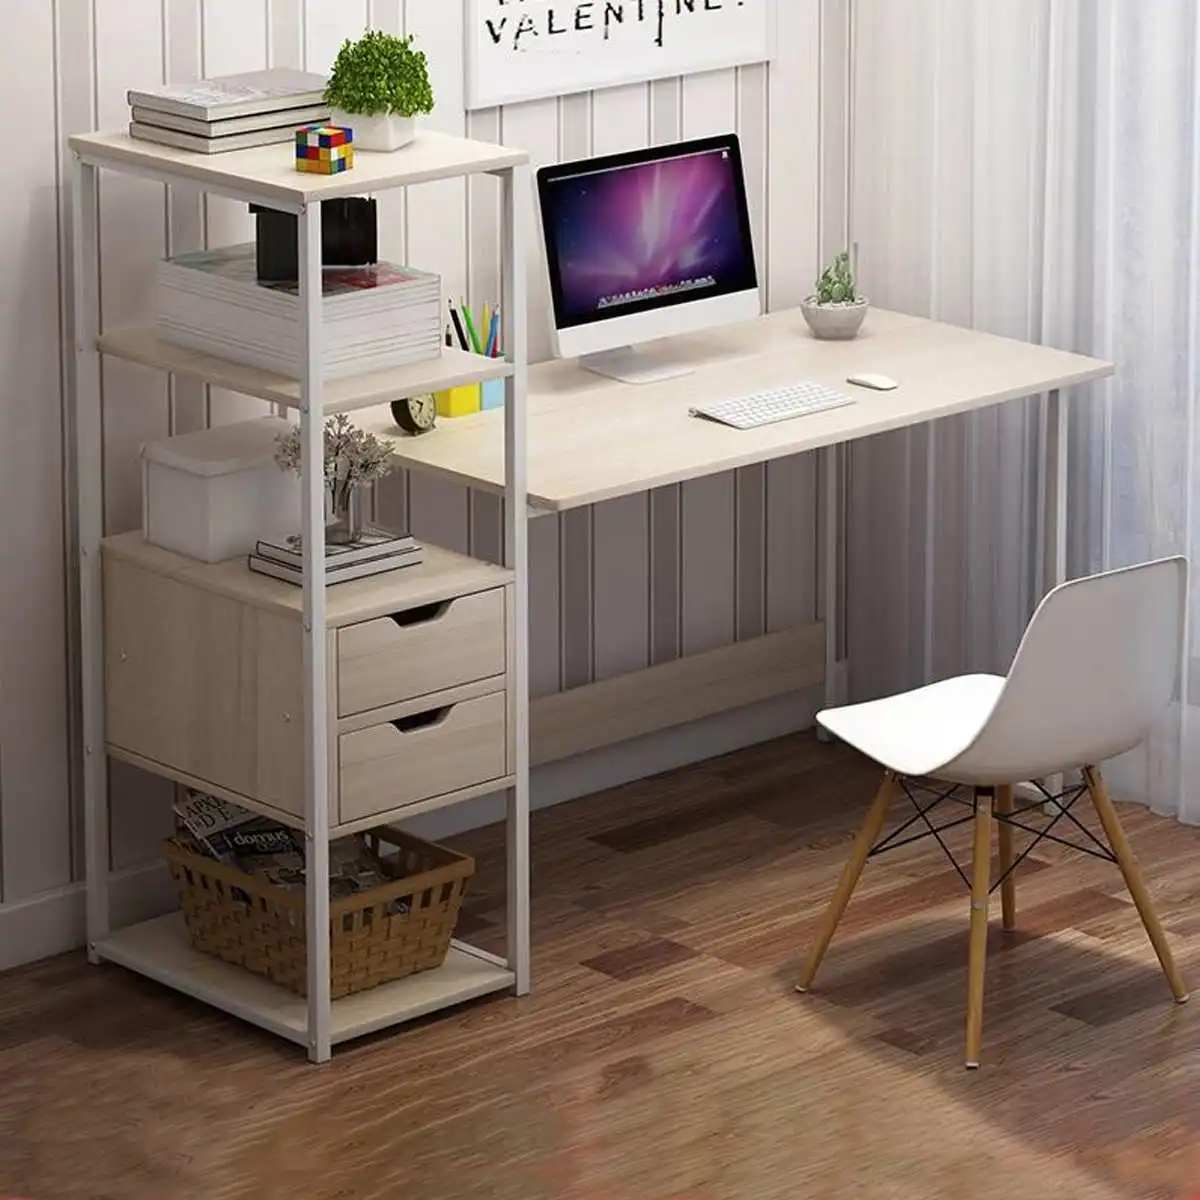 Home Office Wood Computer Desk Laptop Desk Writing Table with Book Shelves Drawers Furniture PC Laptop Workstation Study Table 